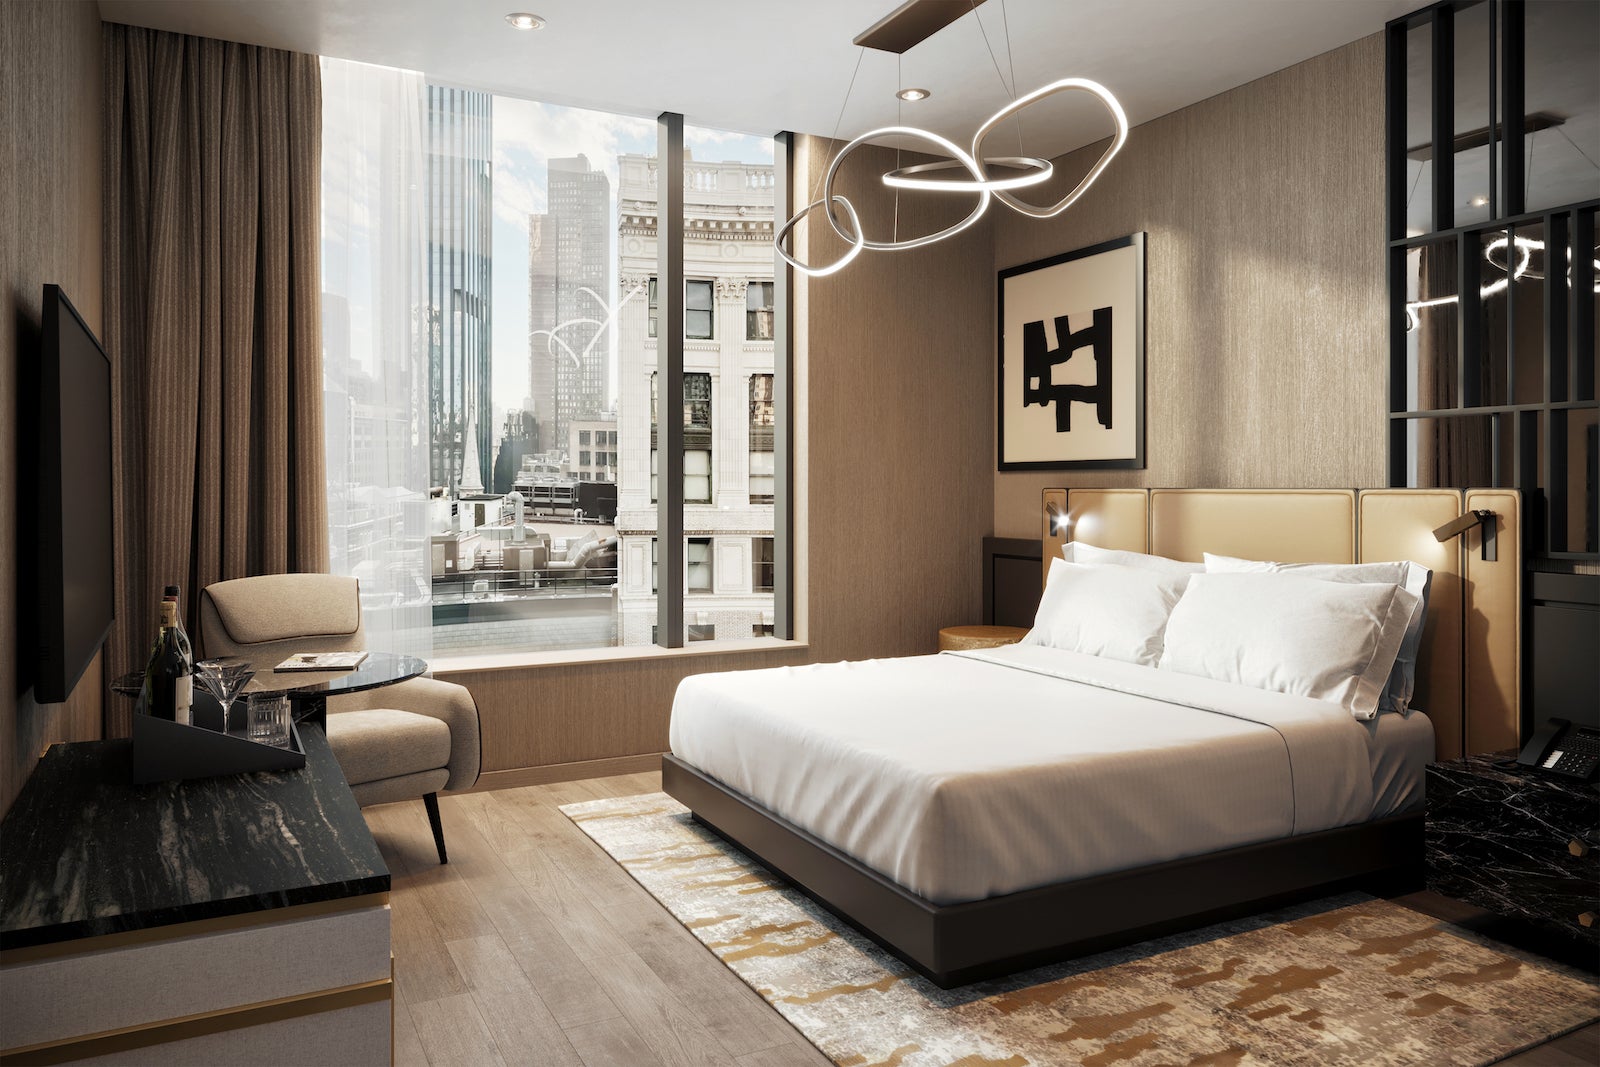 rendering of well-appointed hotel room with bed, rug, views of new york city